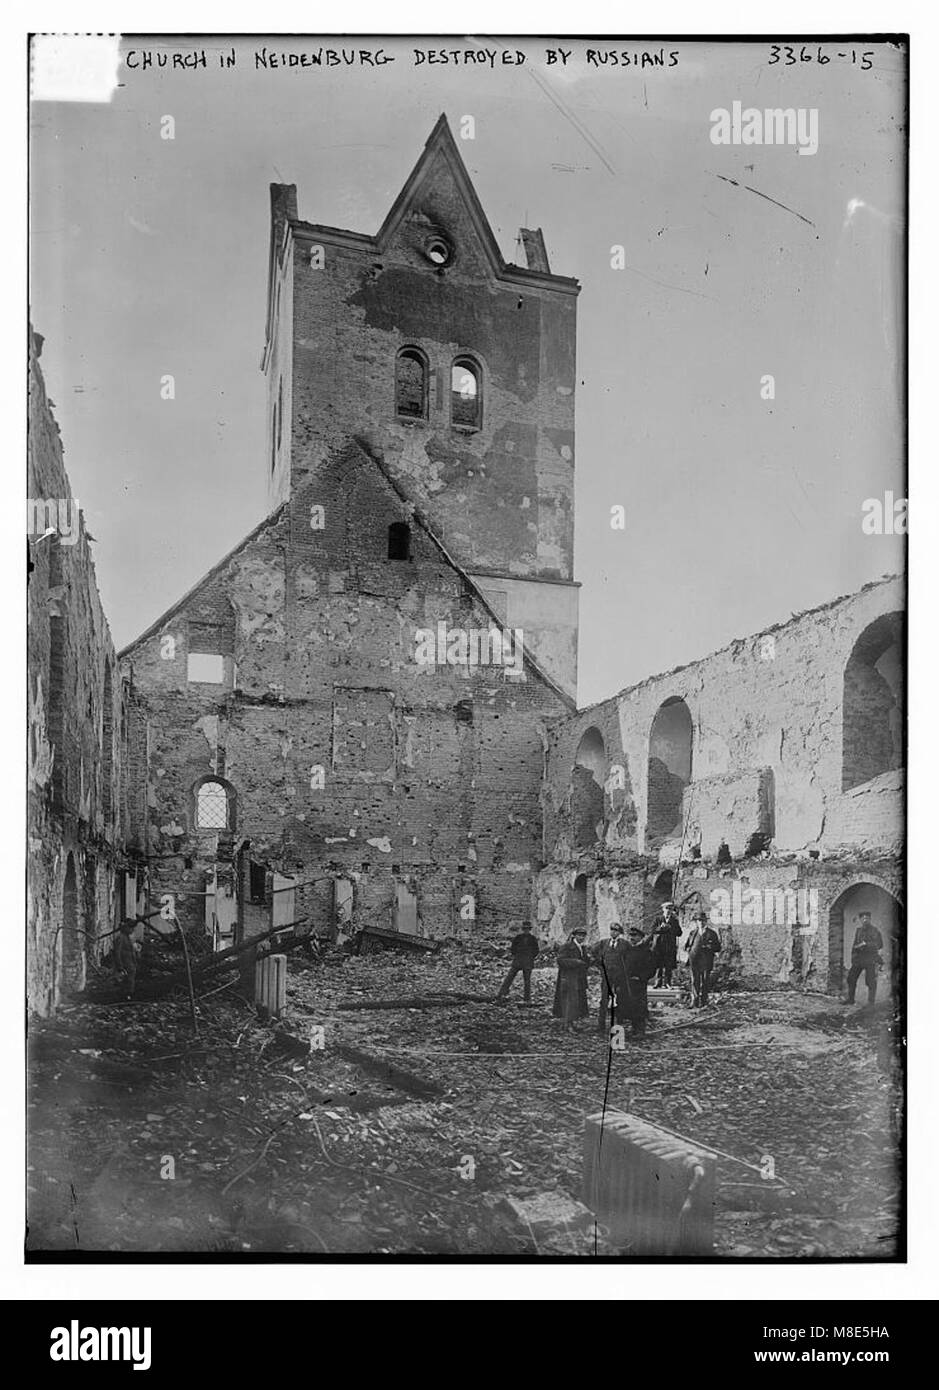 Church in Neidenburg destroyed by Russians LCCN2014698340 Stock Photo